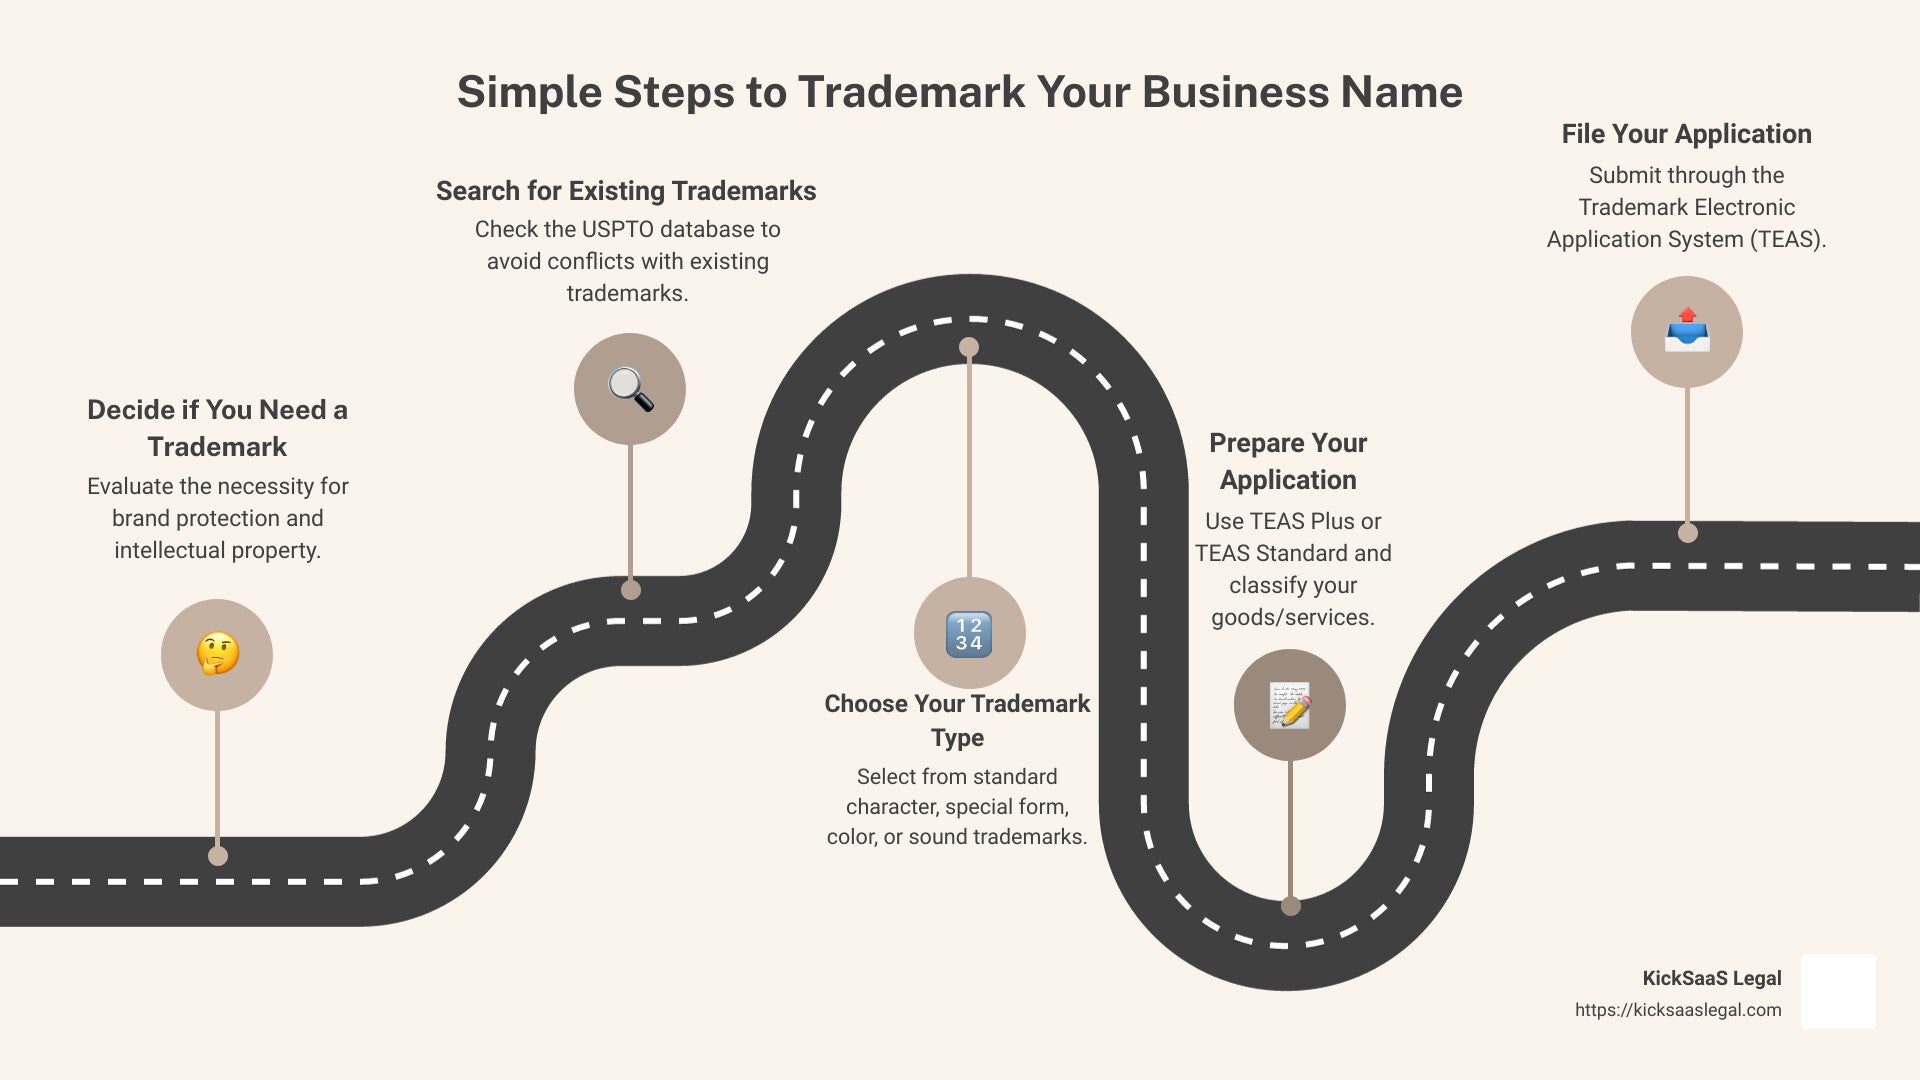 How to Apply for a Trademark Even if You've Never Tried it Before